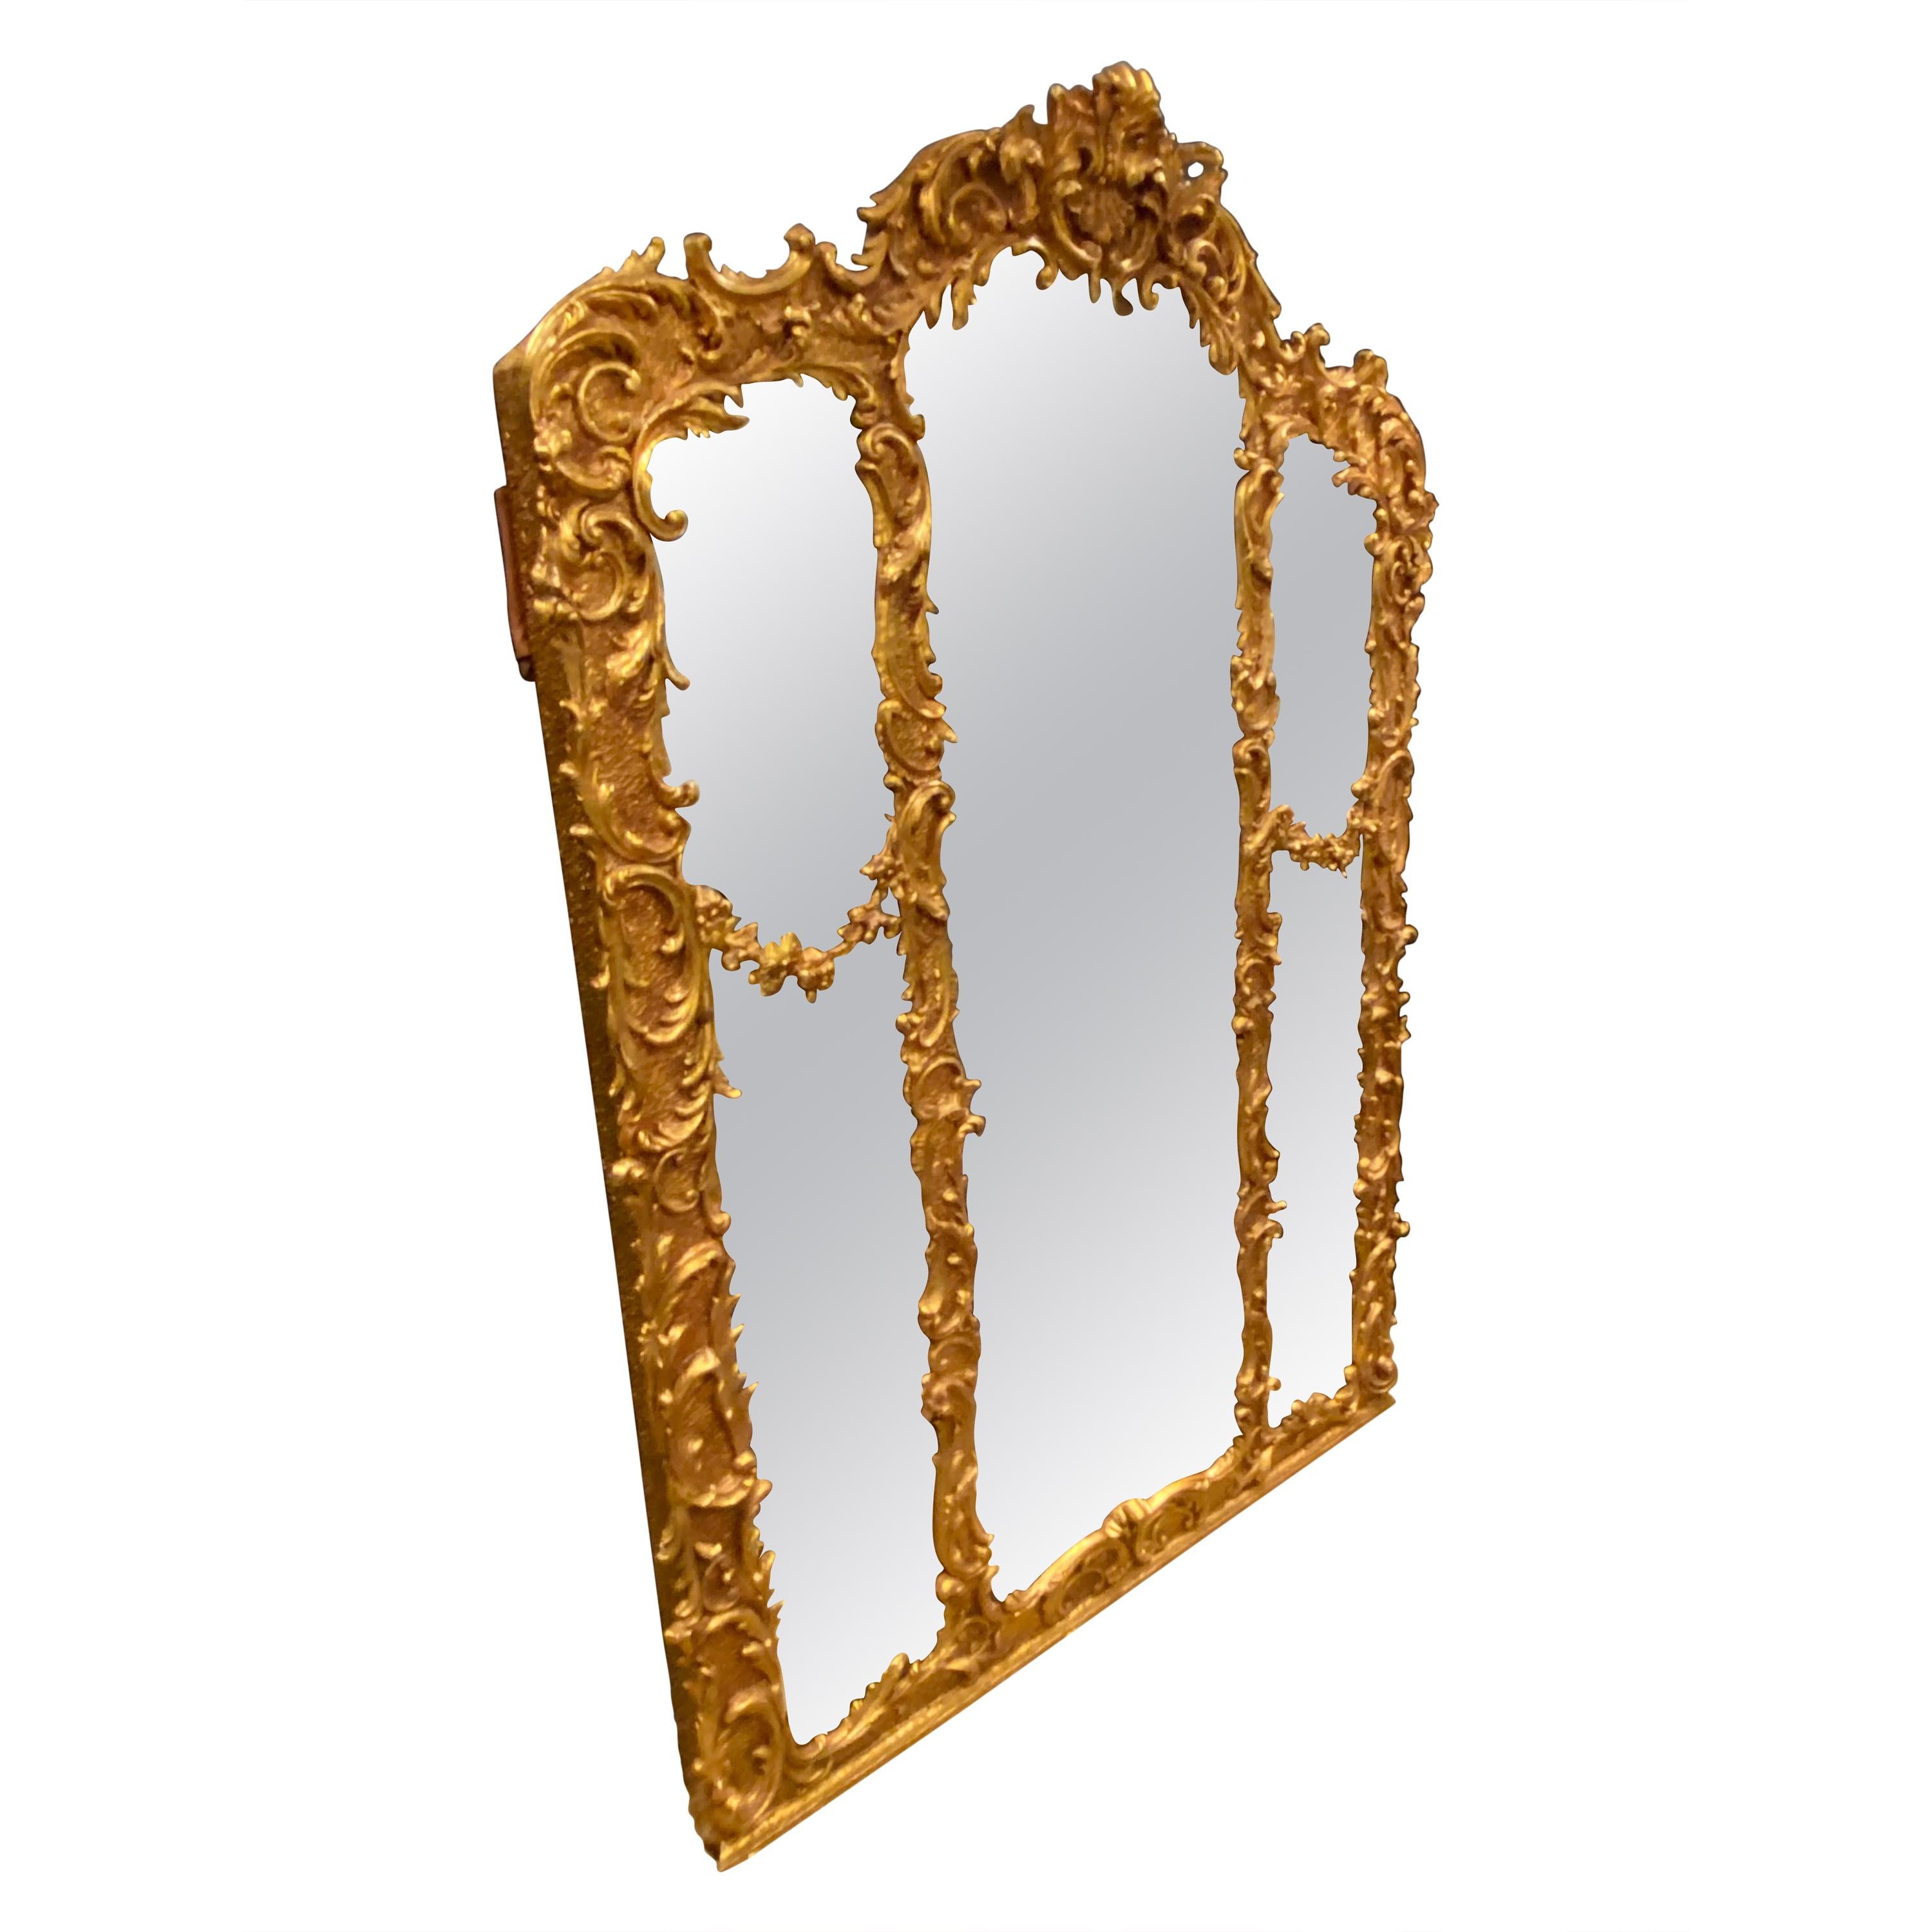 Mirror Rococo Styling Edwardian Wood and Gesso Frame over Mantel Gold Leaf